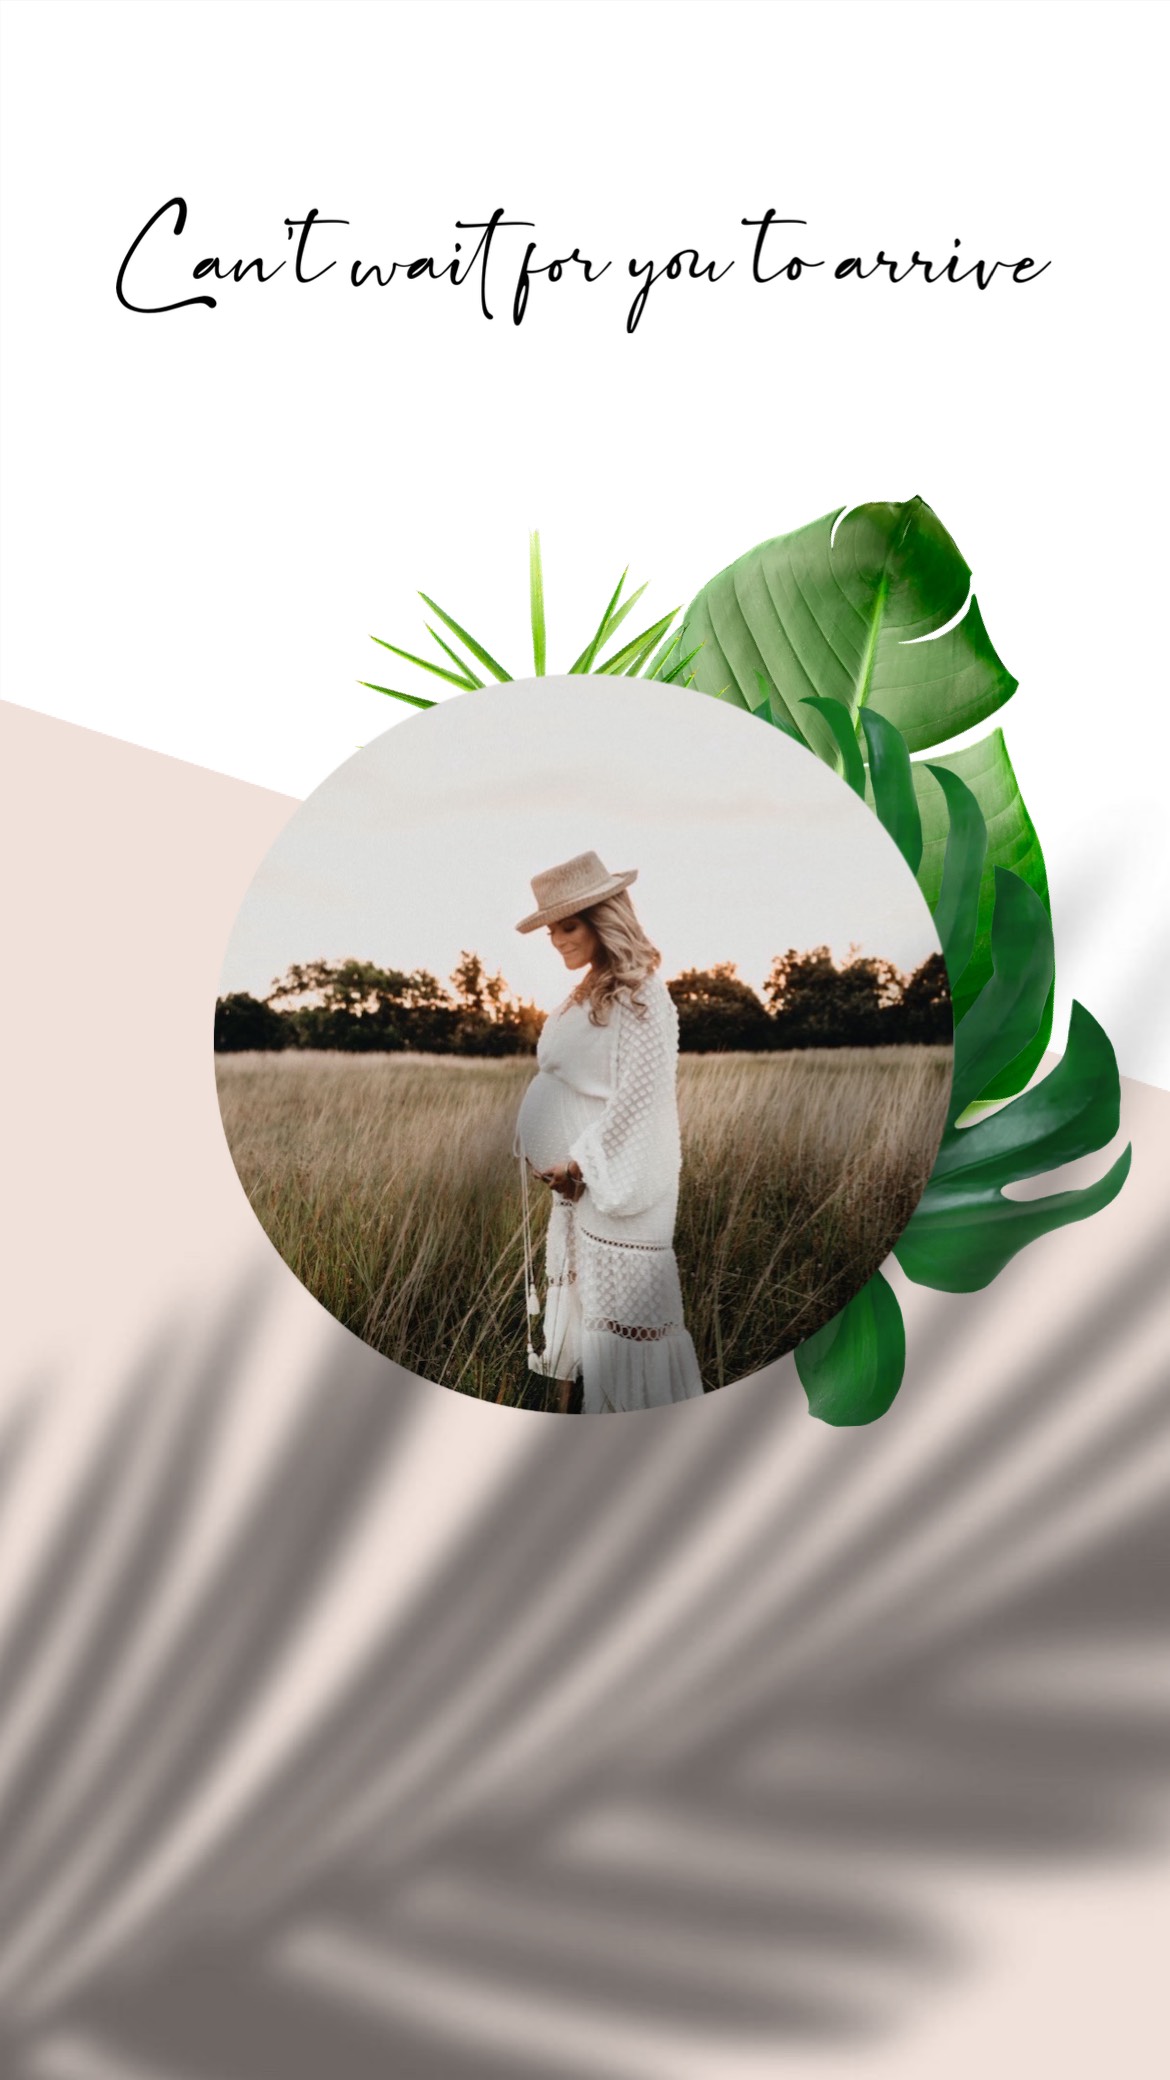 A Woman In A White Dress And Hat Standing In A Field Leaves Template